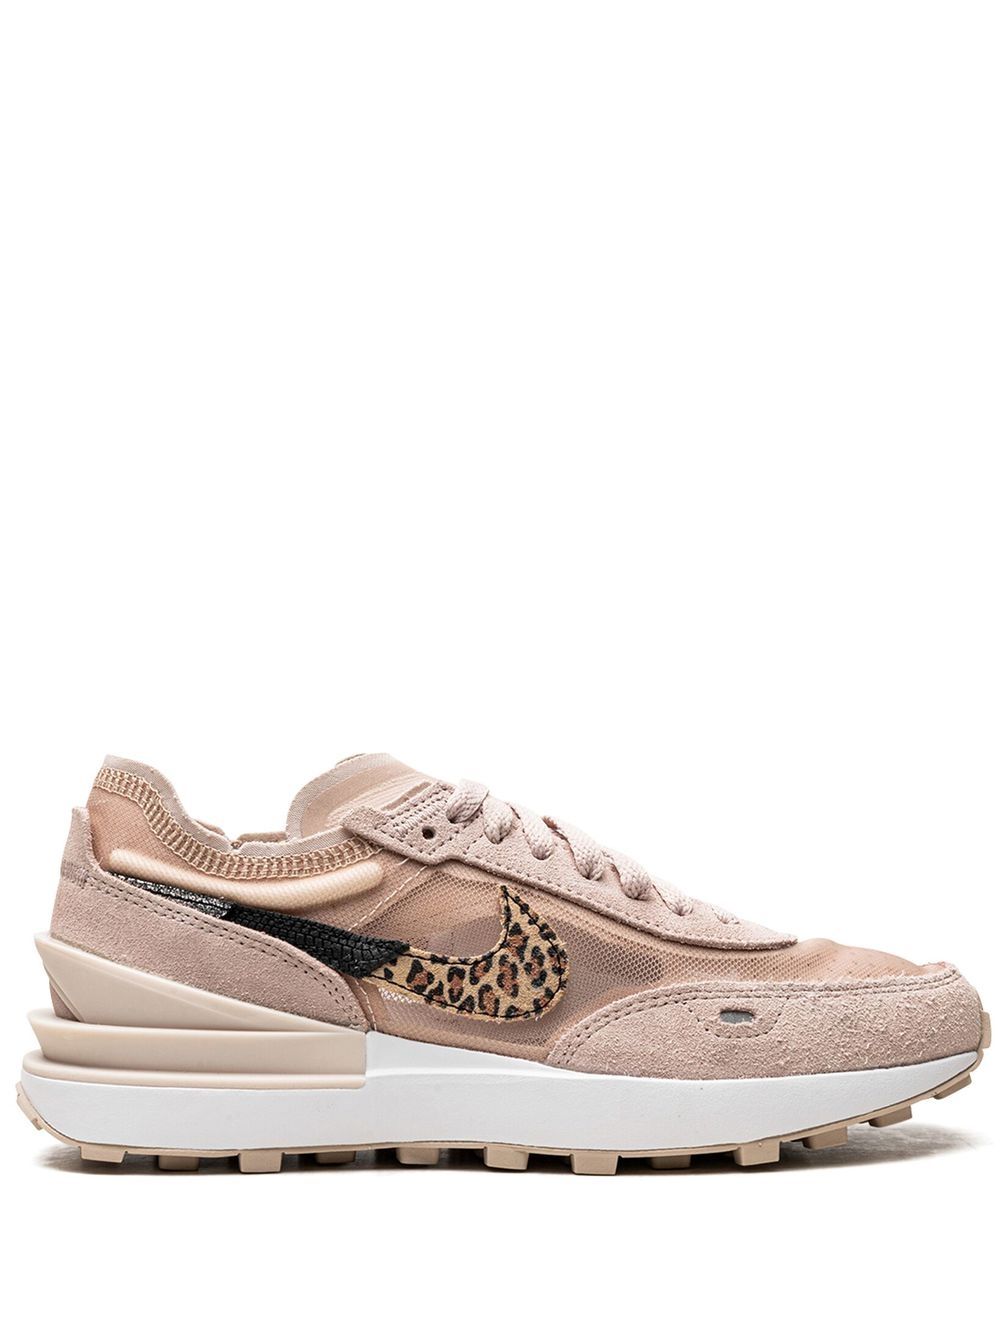 Nike Waffle One "fossil Stone Leopard" Sneakers In Pink